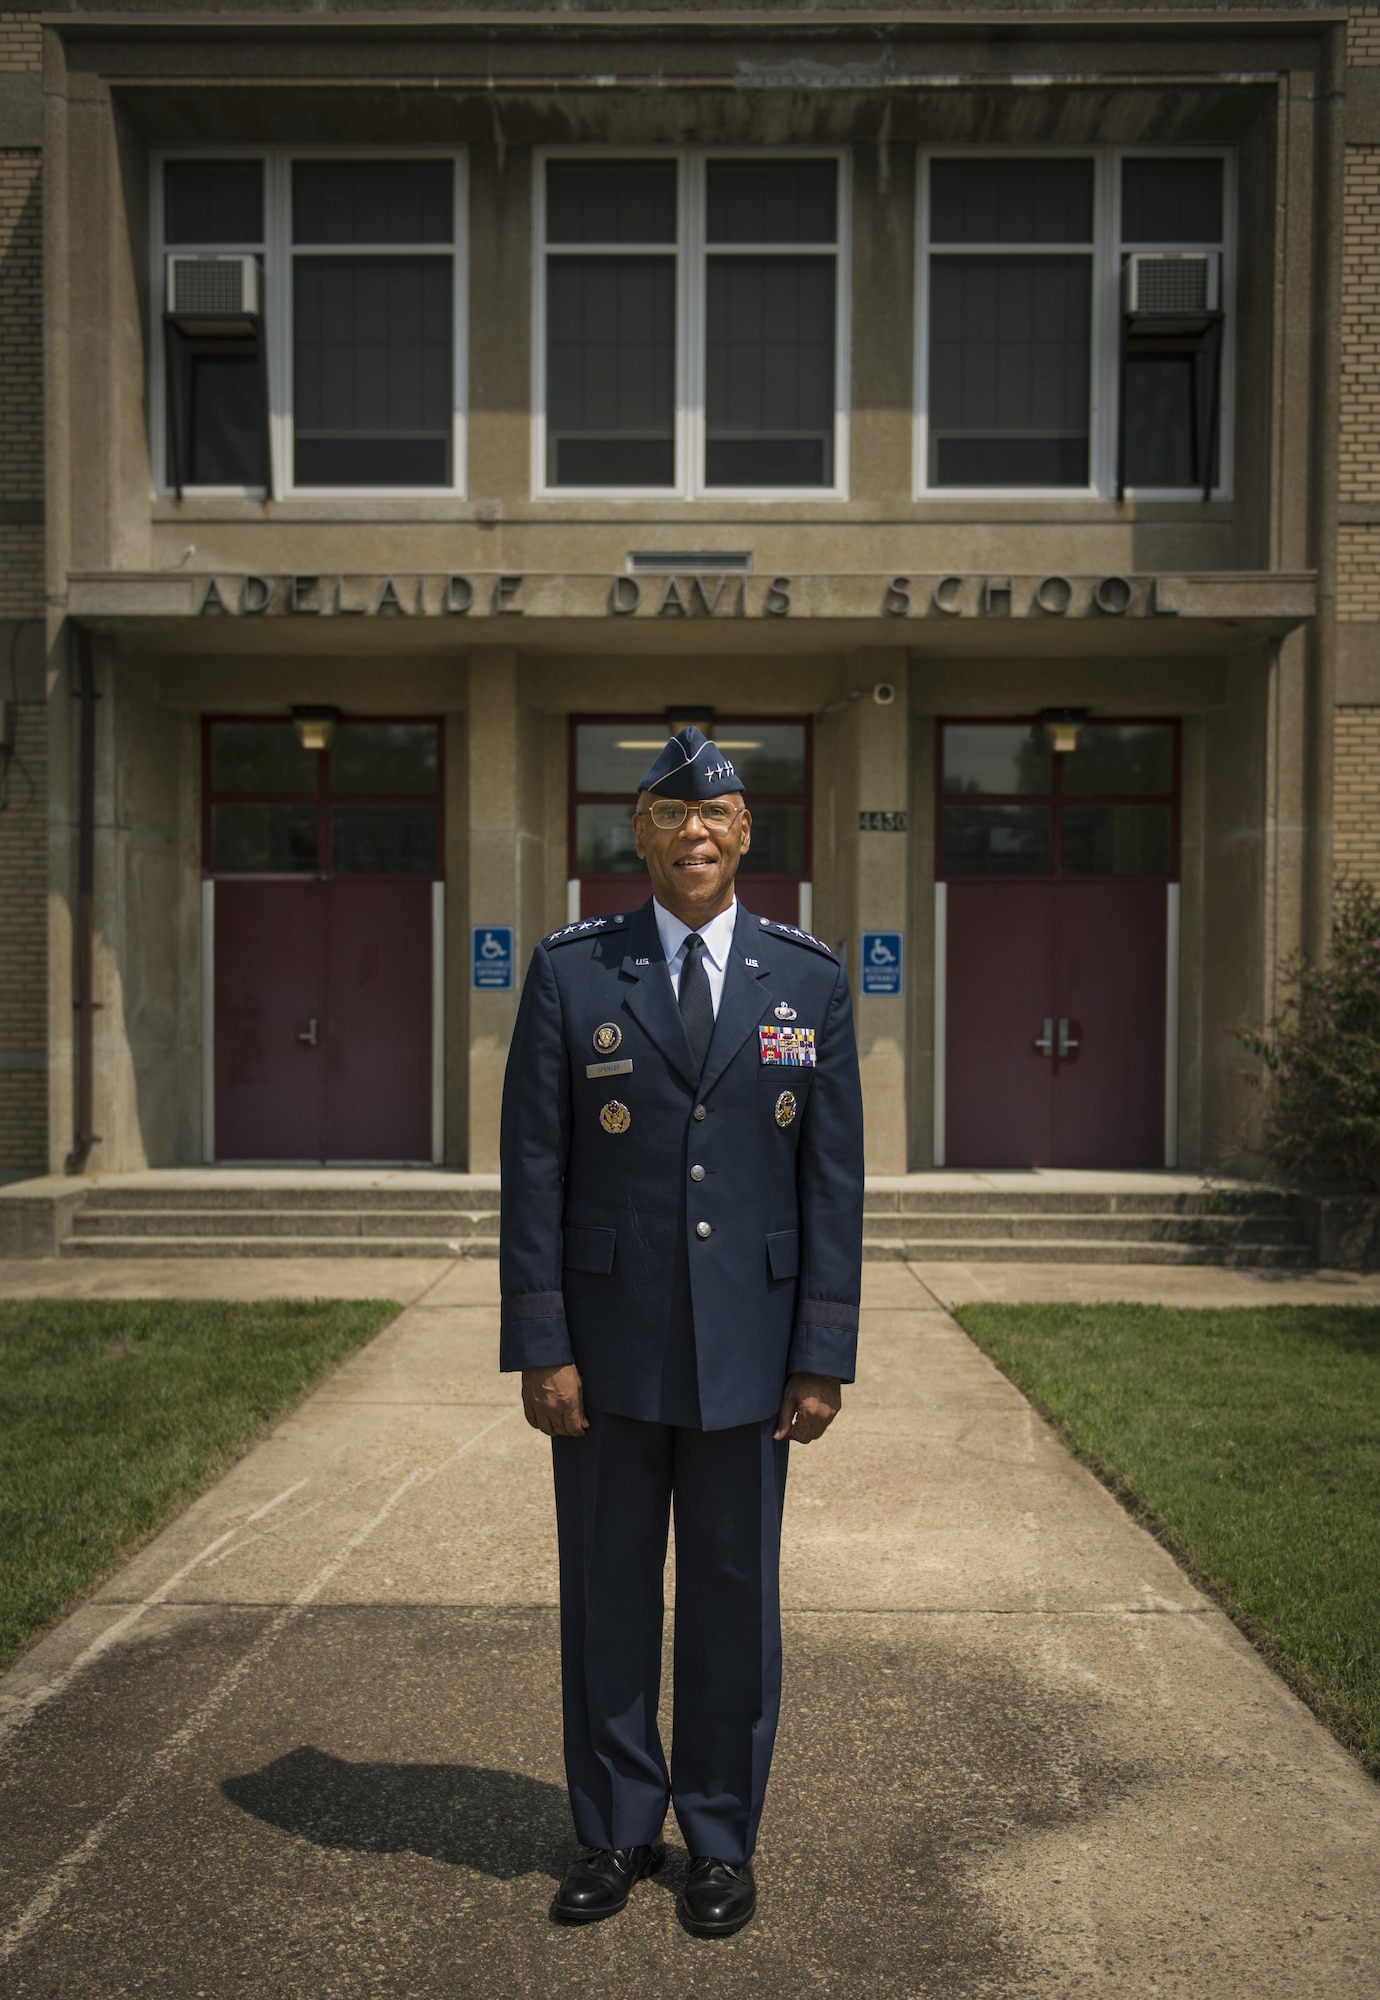 Air Force Vice Chief of Staff Gen. Larry O. Spencer returns to the Adelaide Davis Elementary School in Washington, D.C., on July 30, 2015. Spencer, who will retire Aug. 7 after 44 years in the Air Force, attended the school as a young boy. (U.S. Air Force photo/Staff Sgt. Vernon Young Jr.)